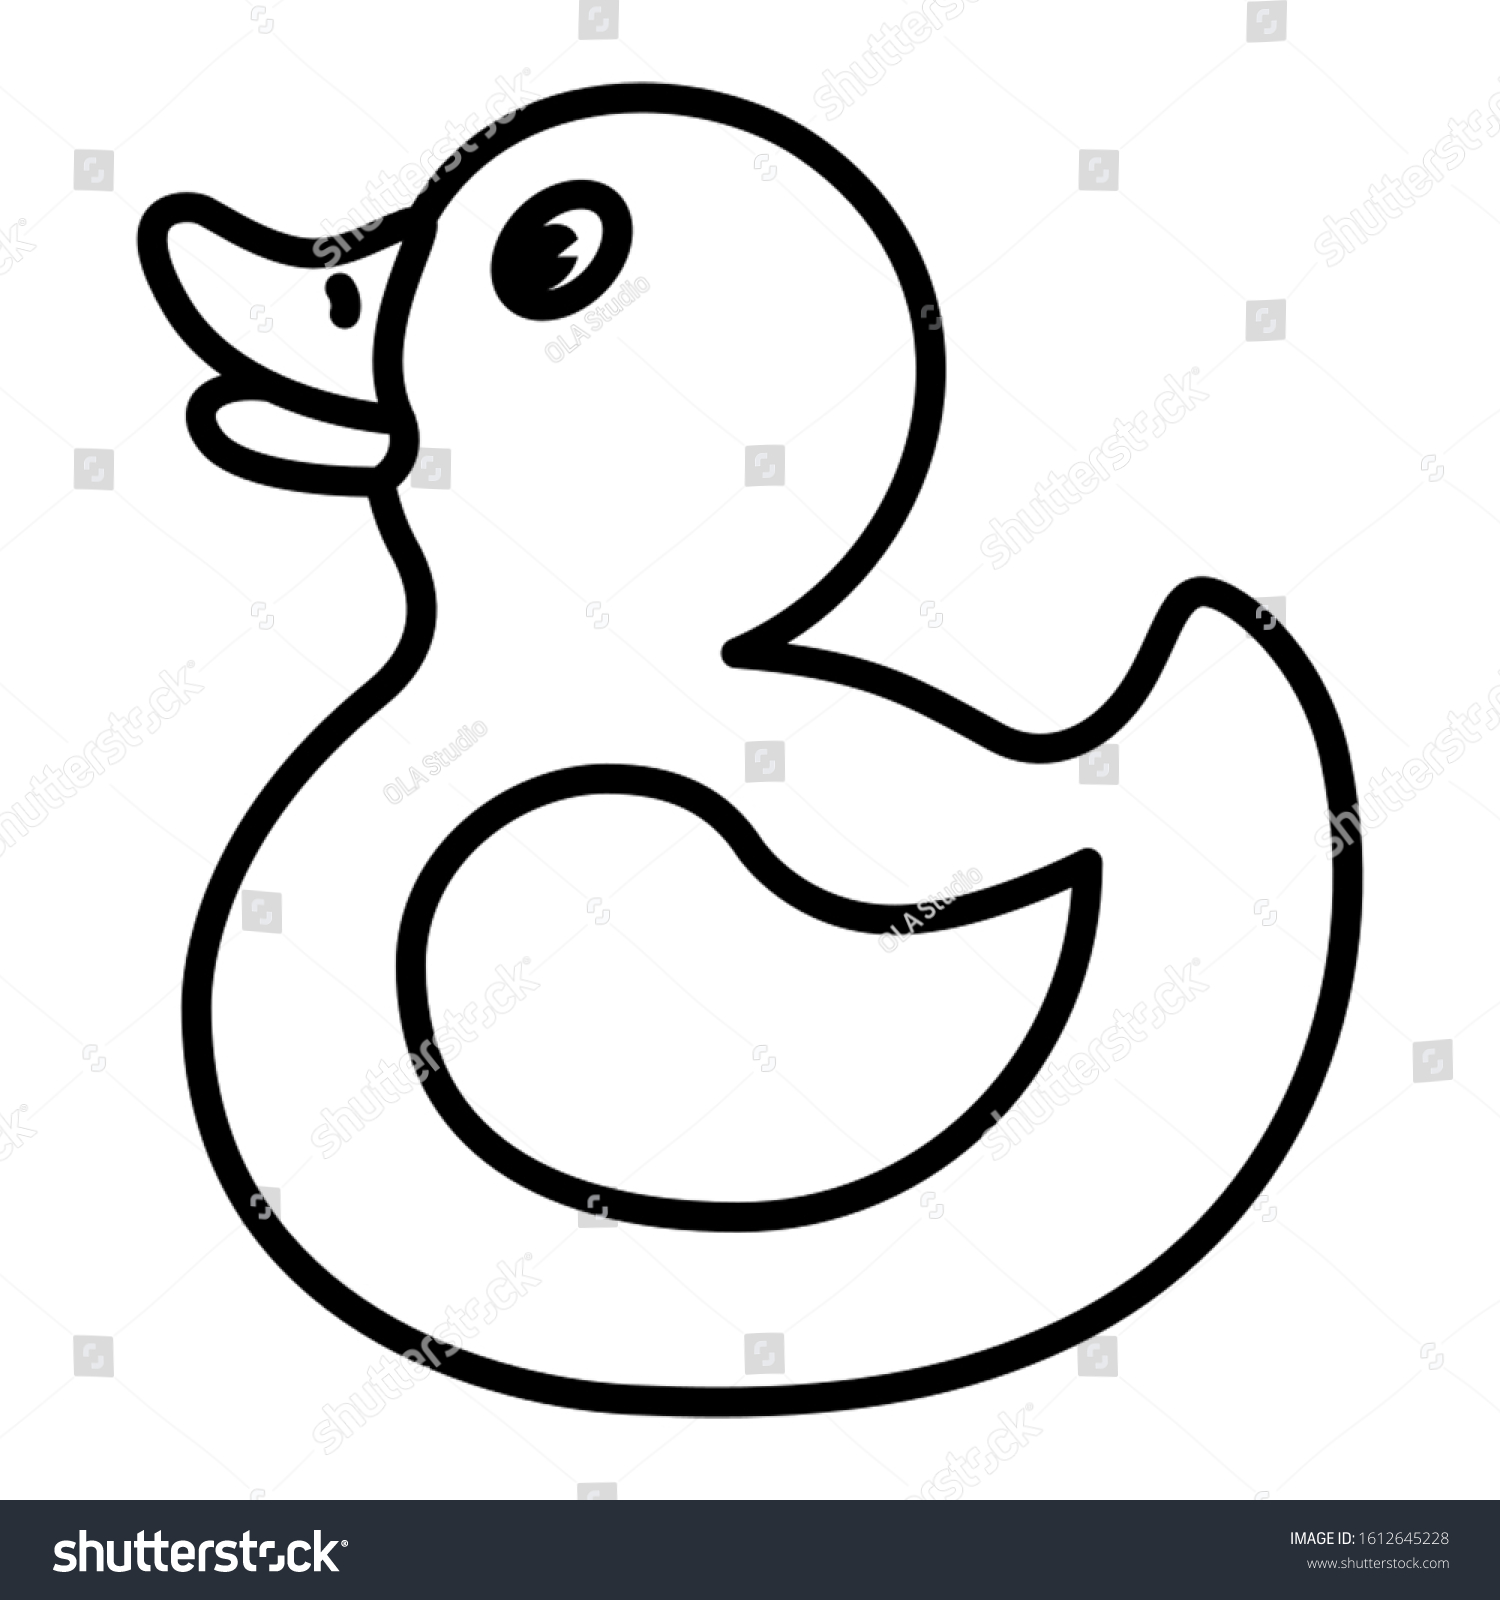 Coloring pages adults rubber duck coloring stock illustration